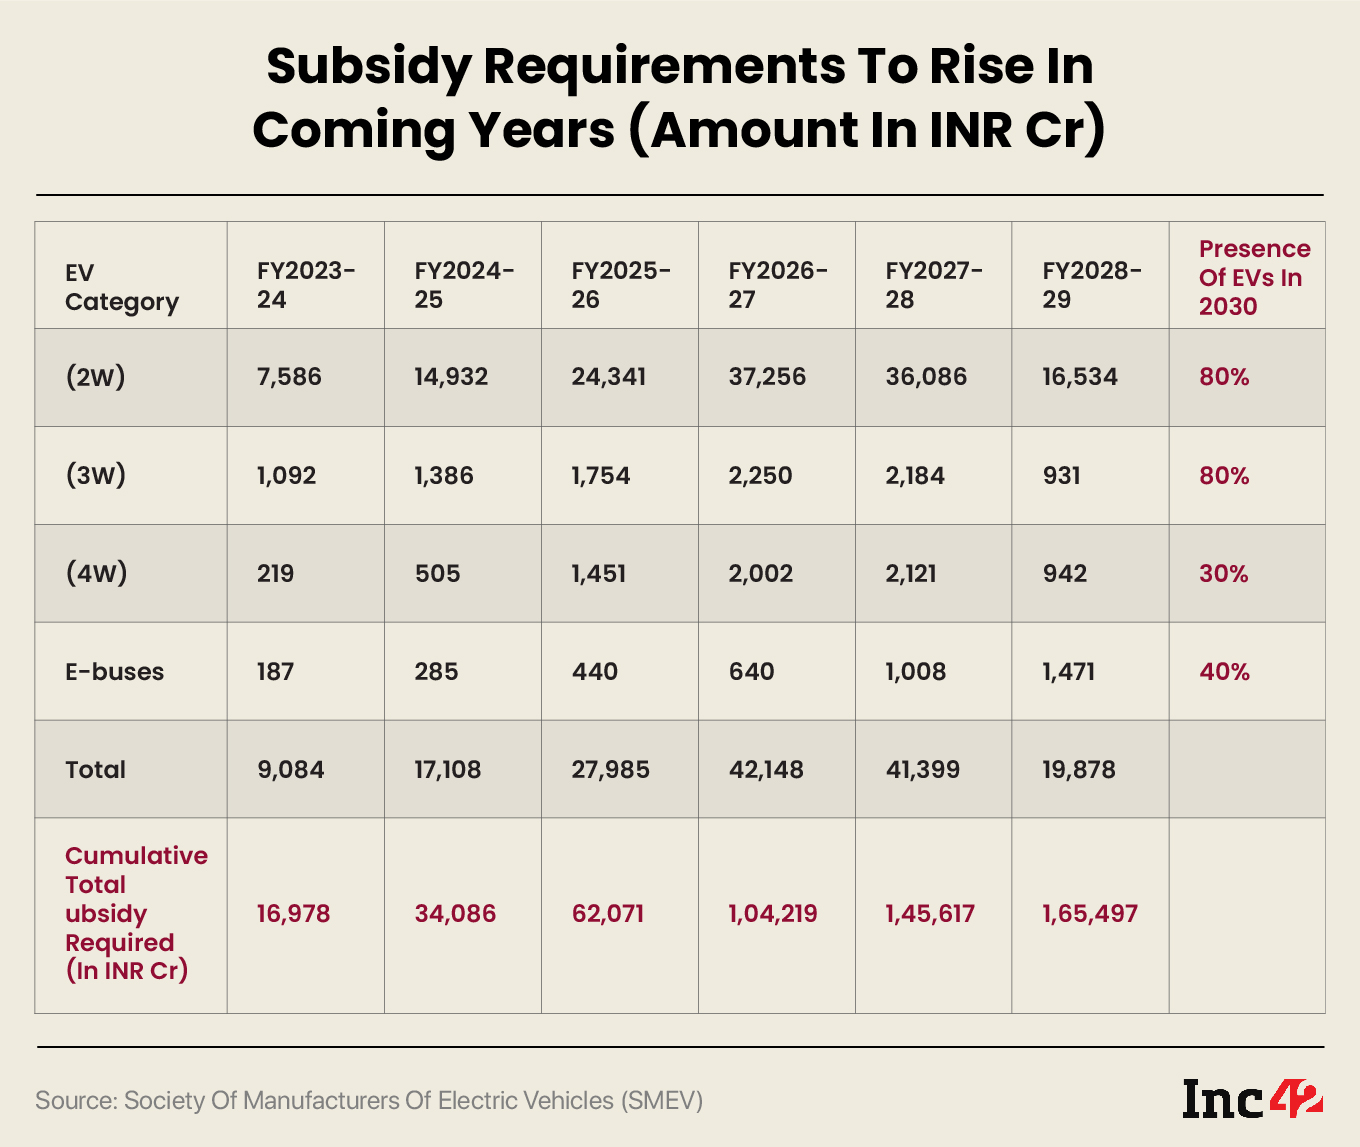 Subsidy requirements to rise coming years